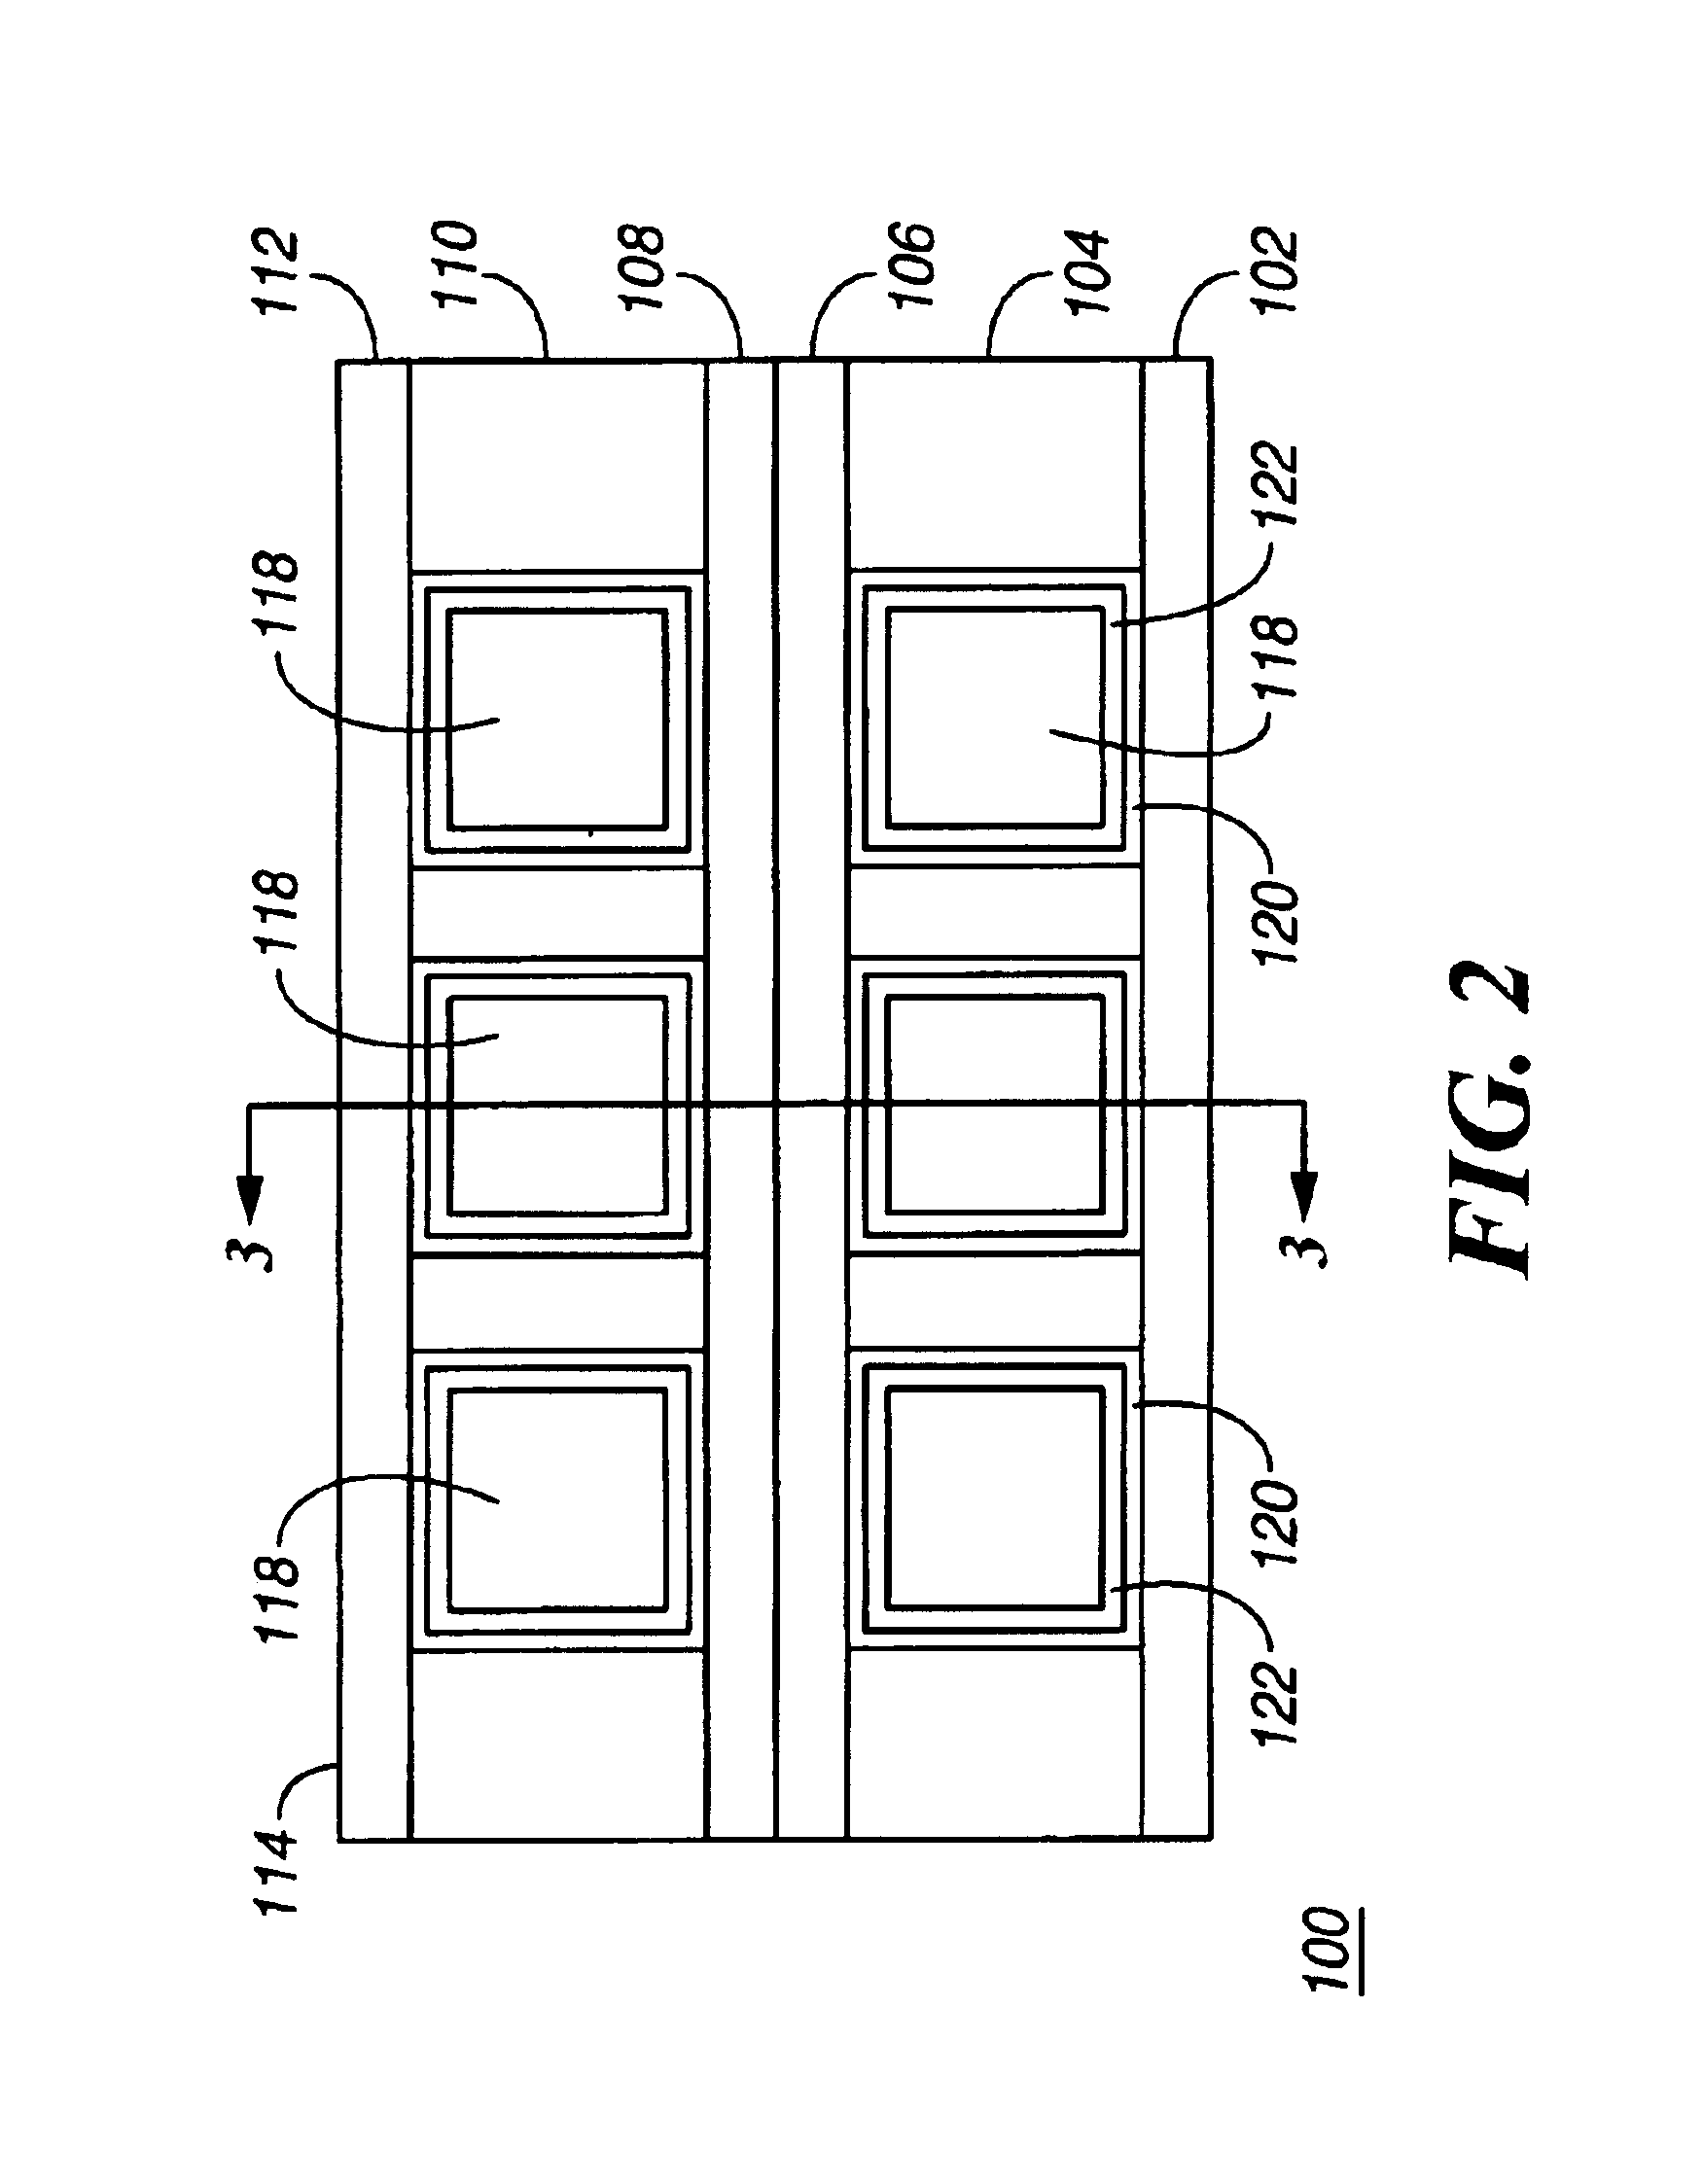 Insertion-type liquid metal latching relay array